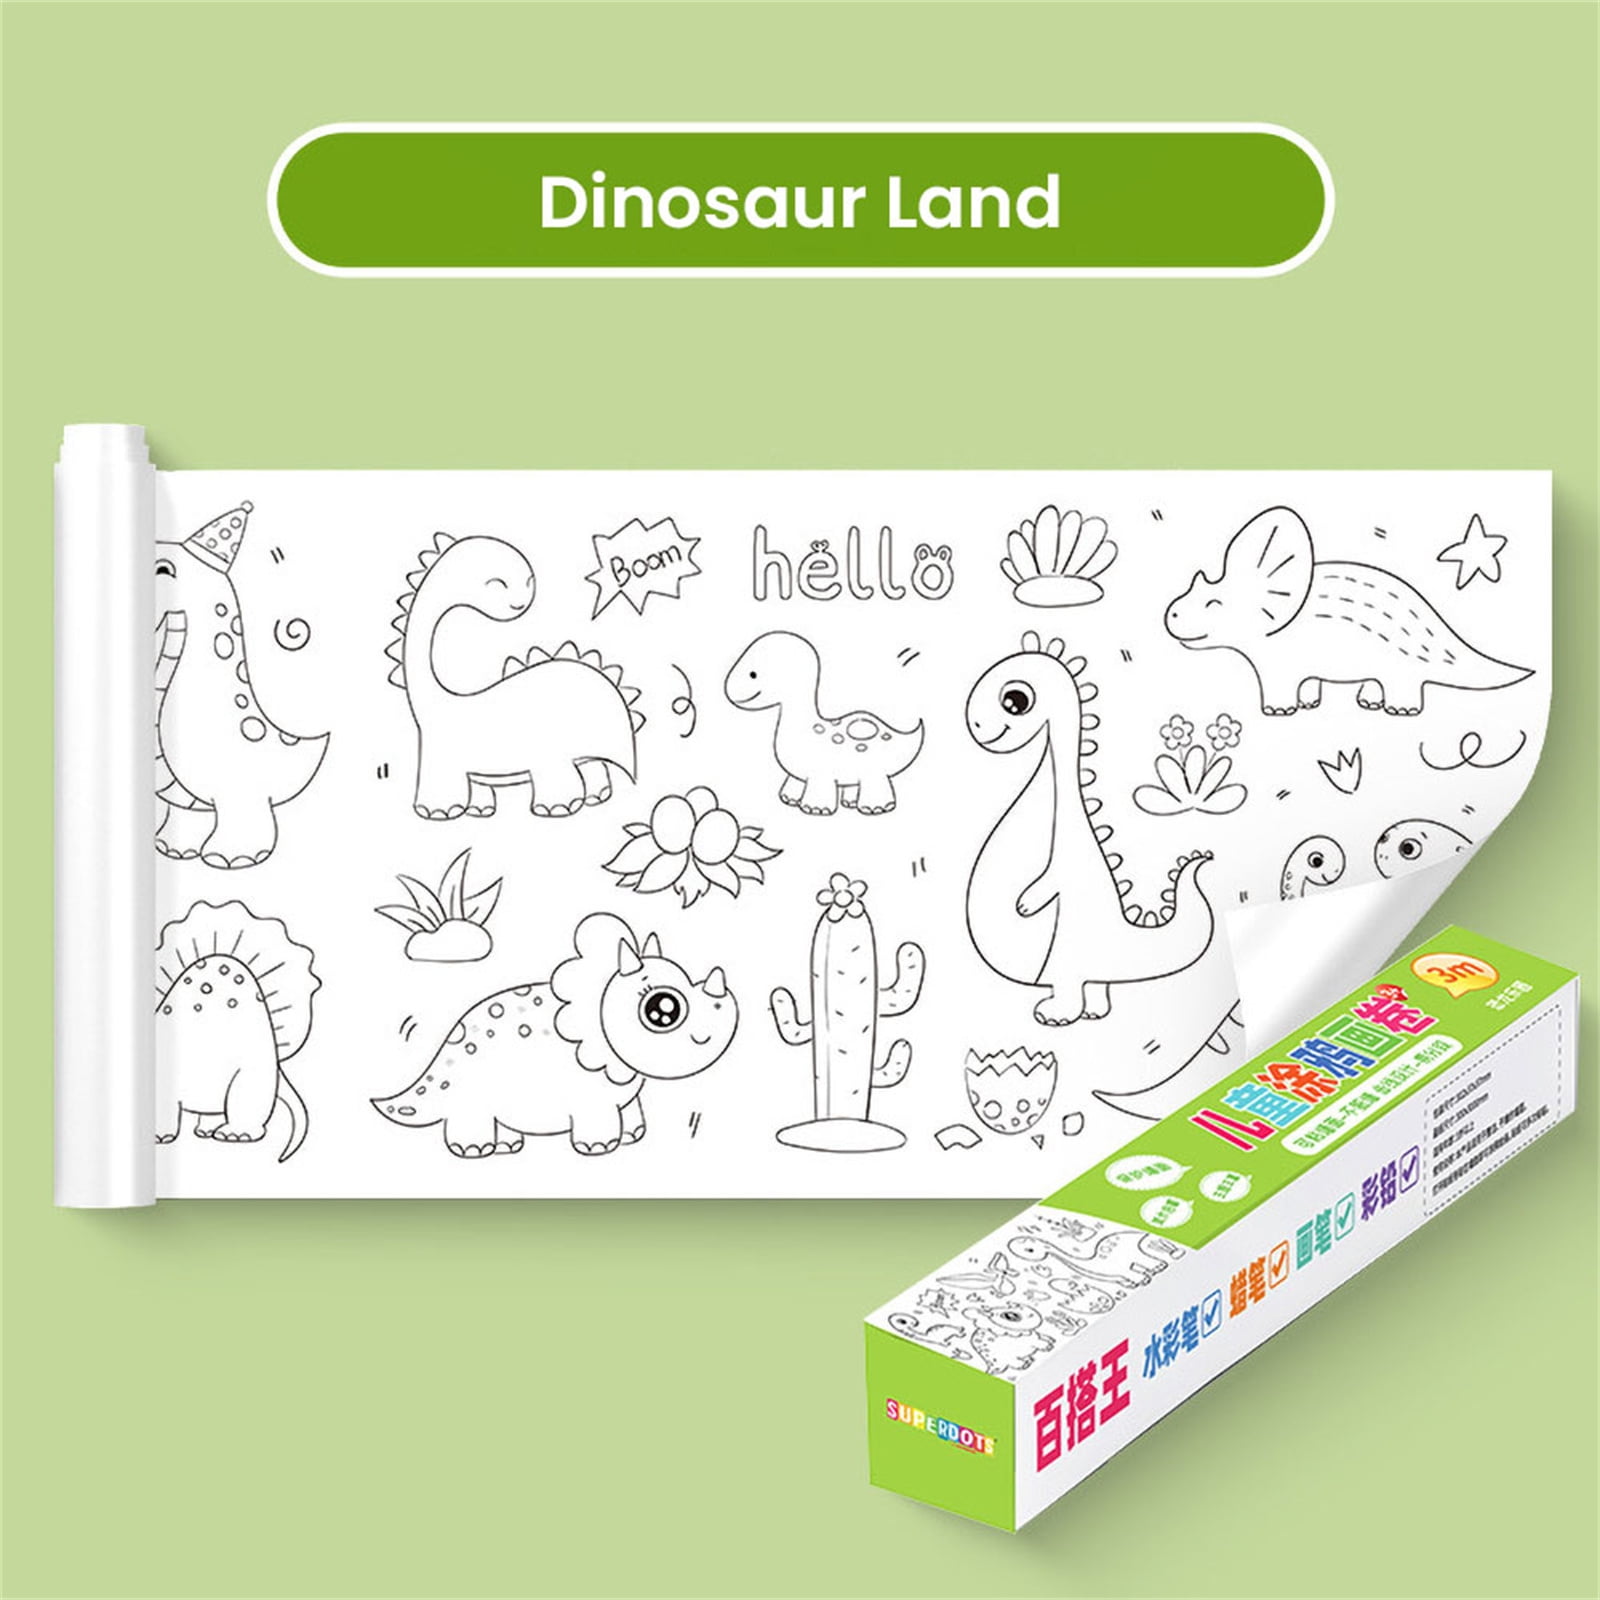 3 Meters High Removable Sticky Childrens Drawing Roll, Coloring Books  Painting, Drawing & Art Supplies Only د.ب.‏ 3.10 بات بات Mobile